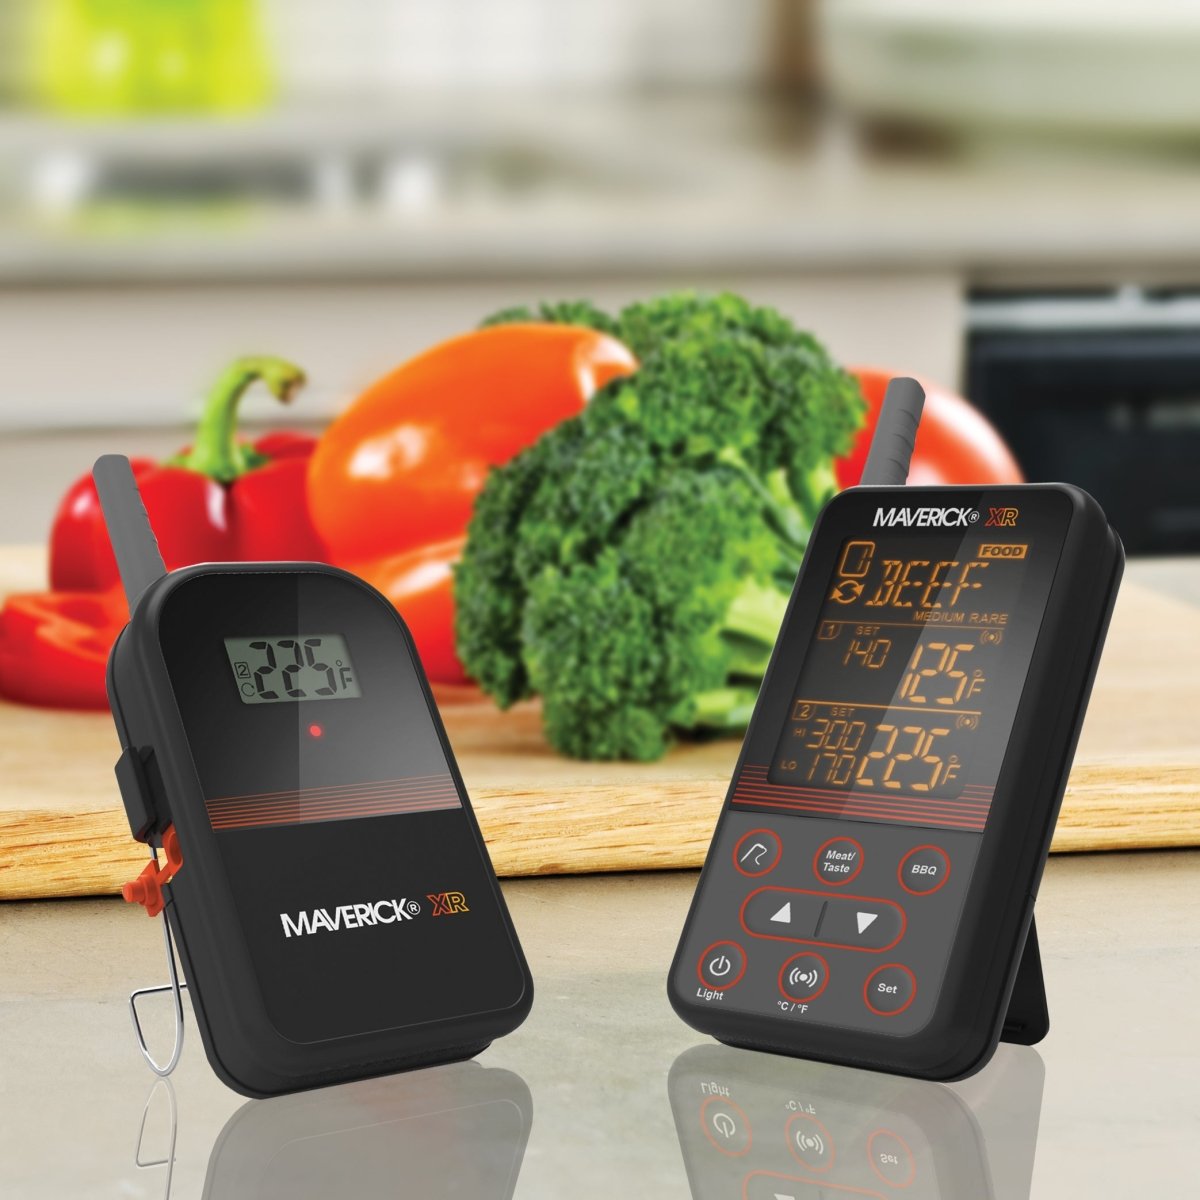 Maverick Extended Range Wireless BBQ and Meat Thermometer - Texas Star Grill Shop XR-40